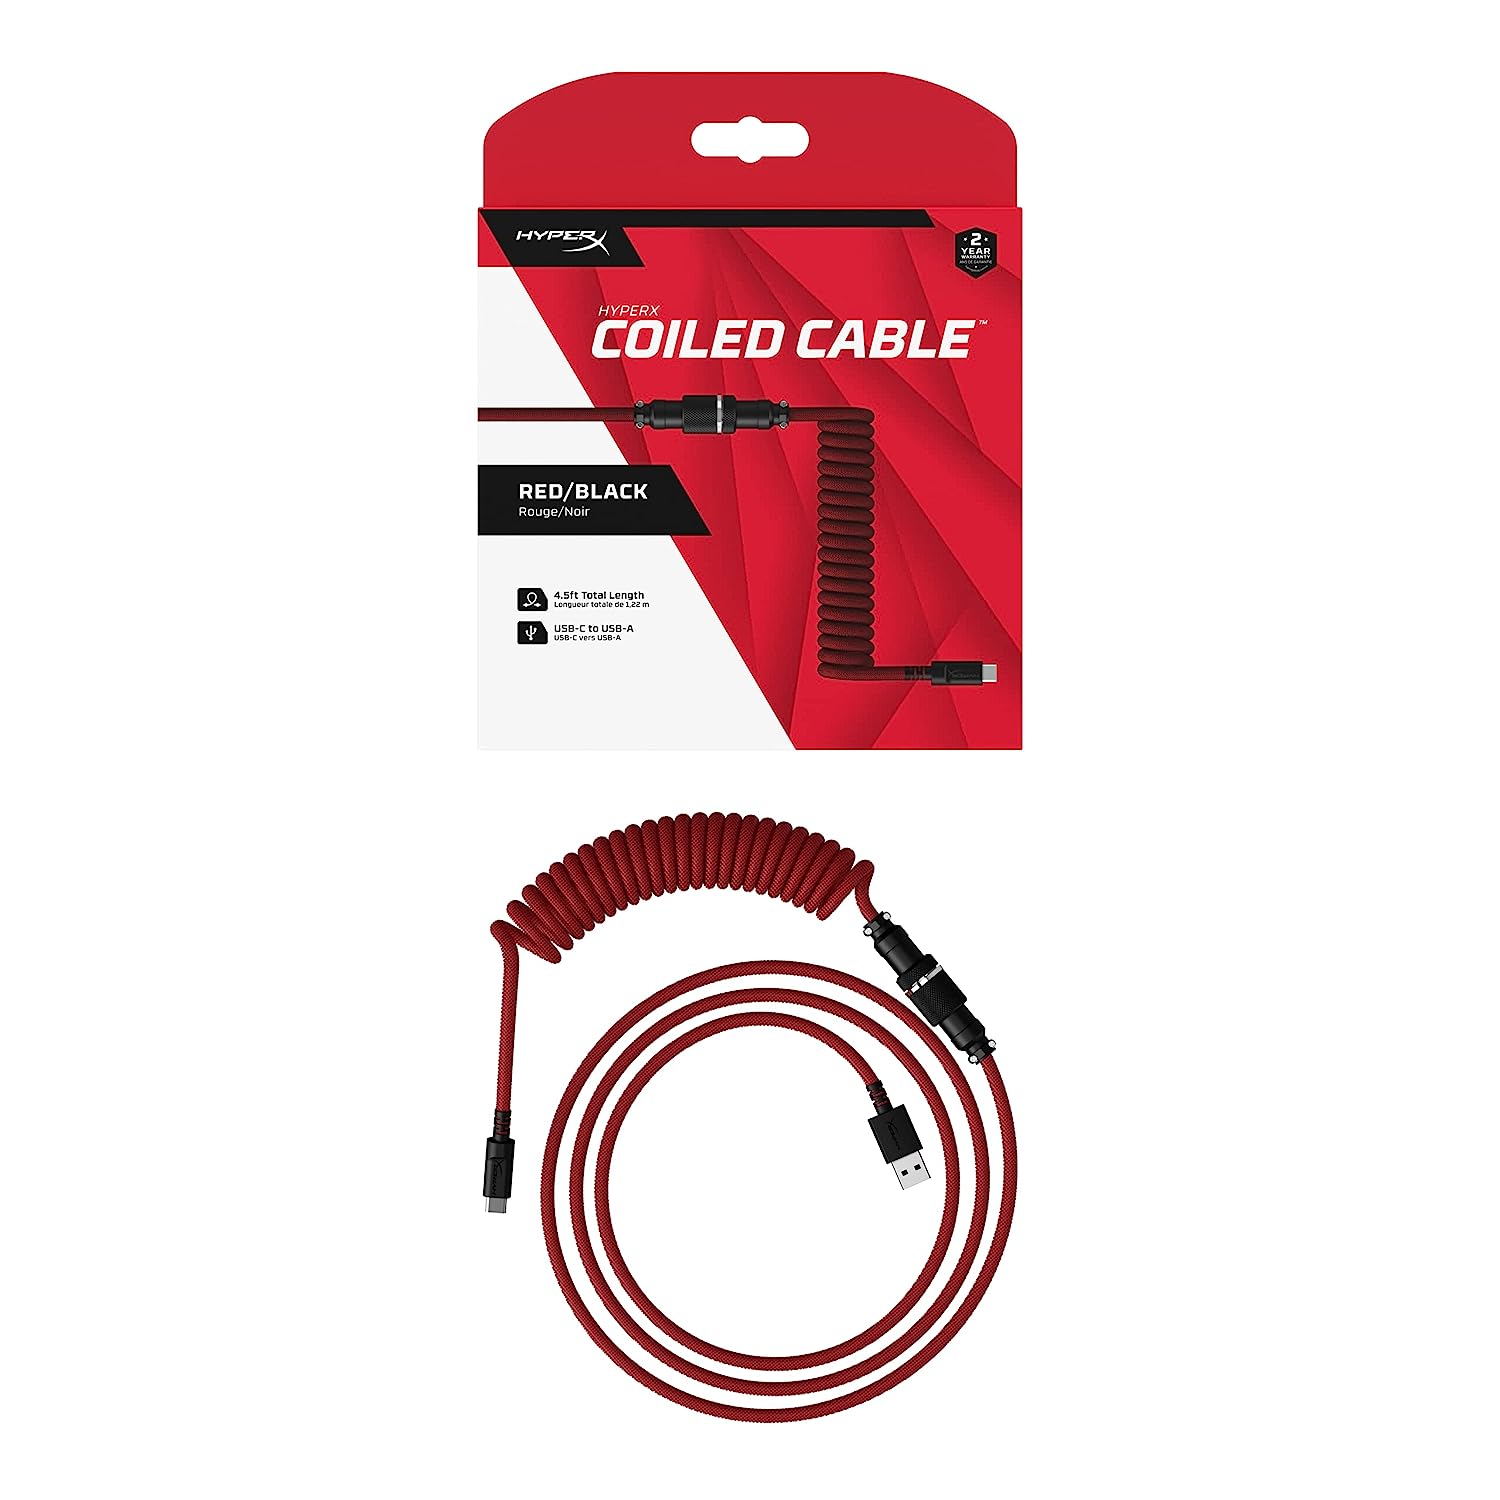 HyperX Coiled Cable - Durable Coiled Cable, Stylish Design, 5-Pin Aviator  Connector, USB-C to USB-A - Red/Black (6J677AA) - Buy HyperX Coiled Cable 